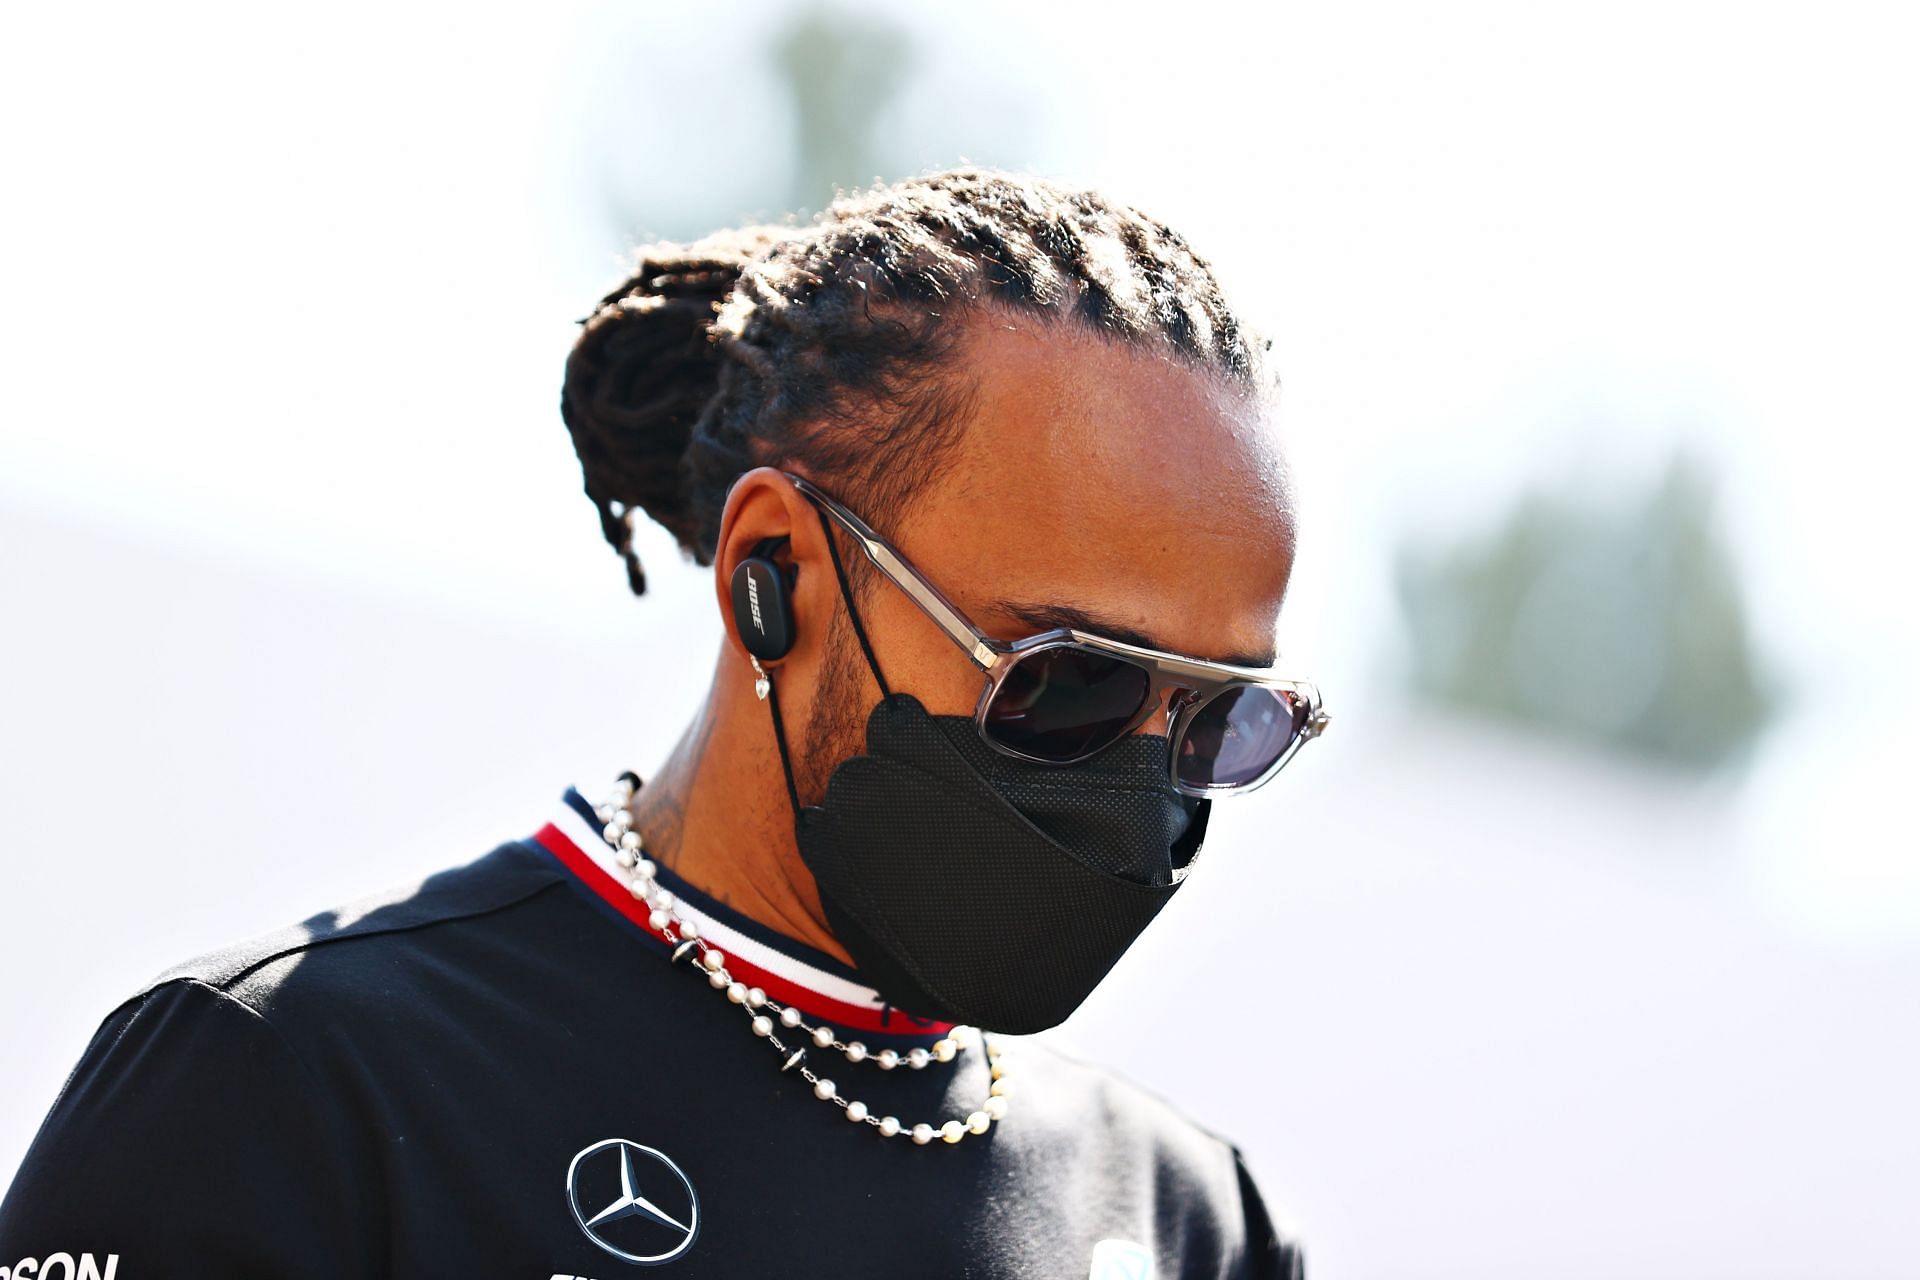 Lewis Hamilton in the F1 paddock (Photo by Mark Thompson/Getty Images)